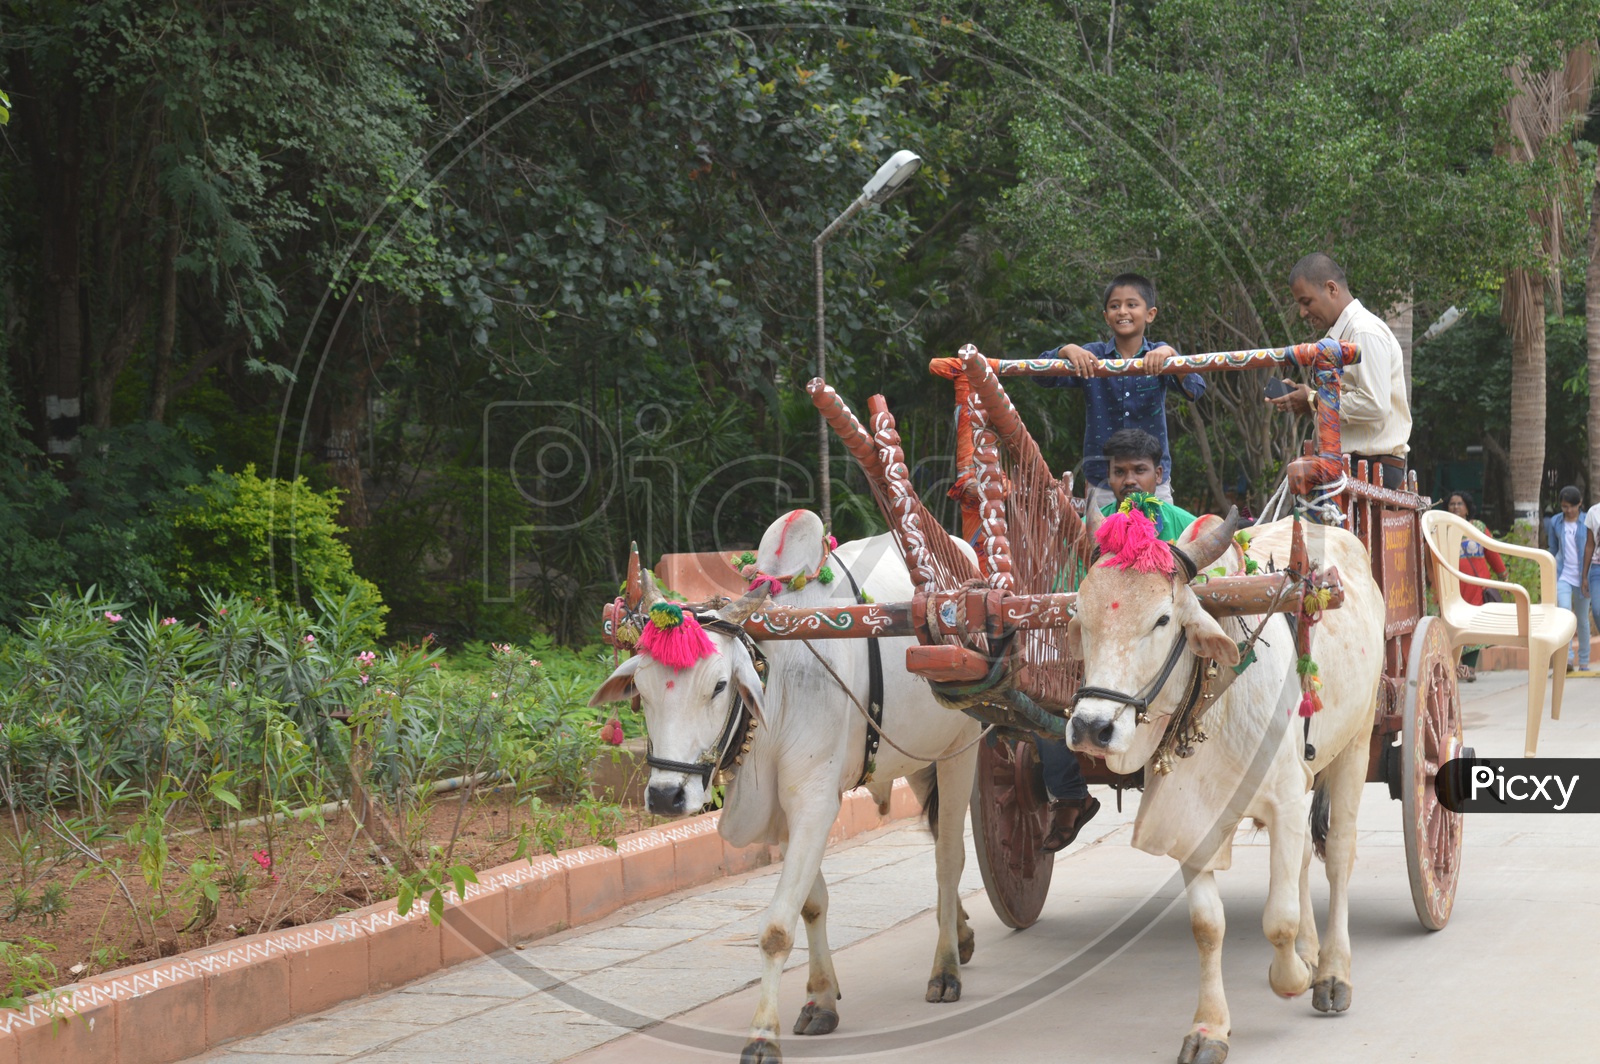 A bullock cart on the road